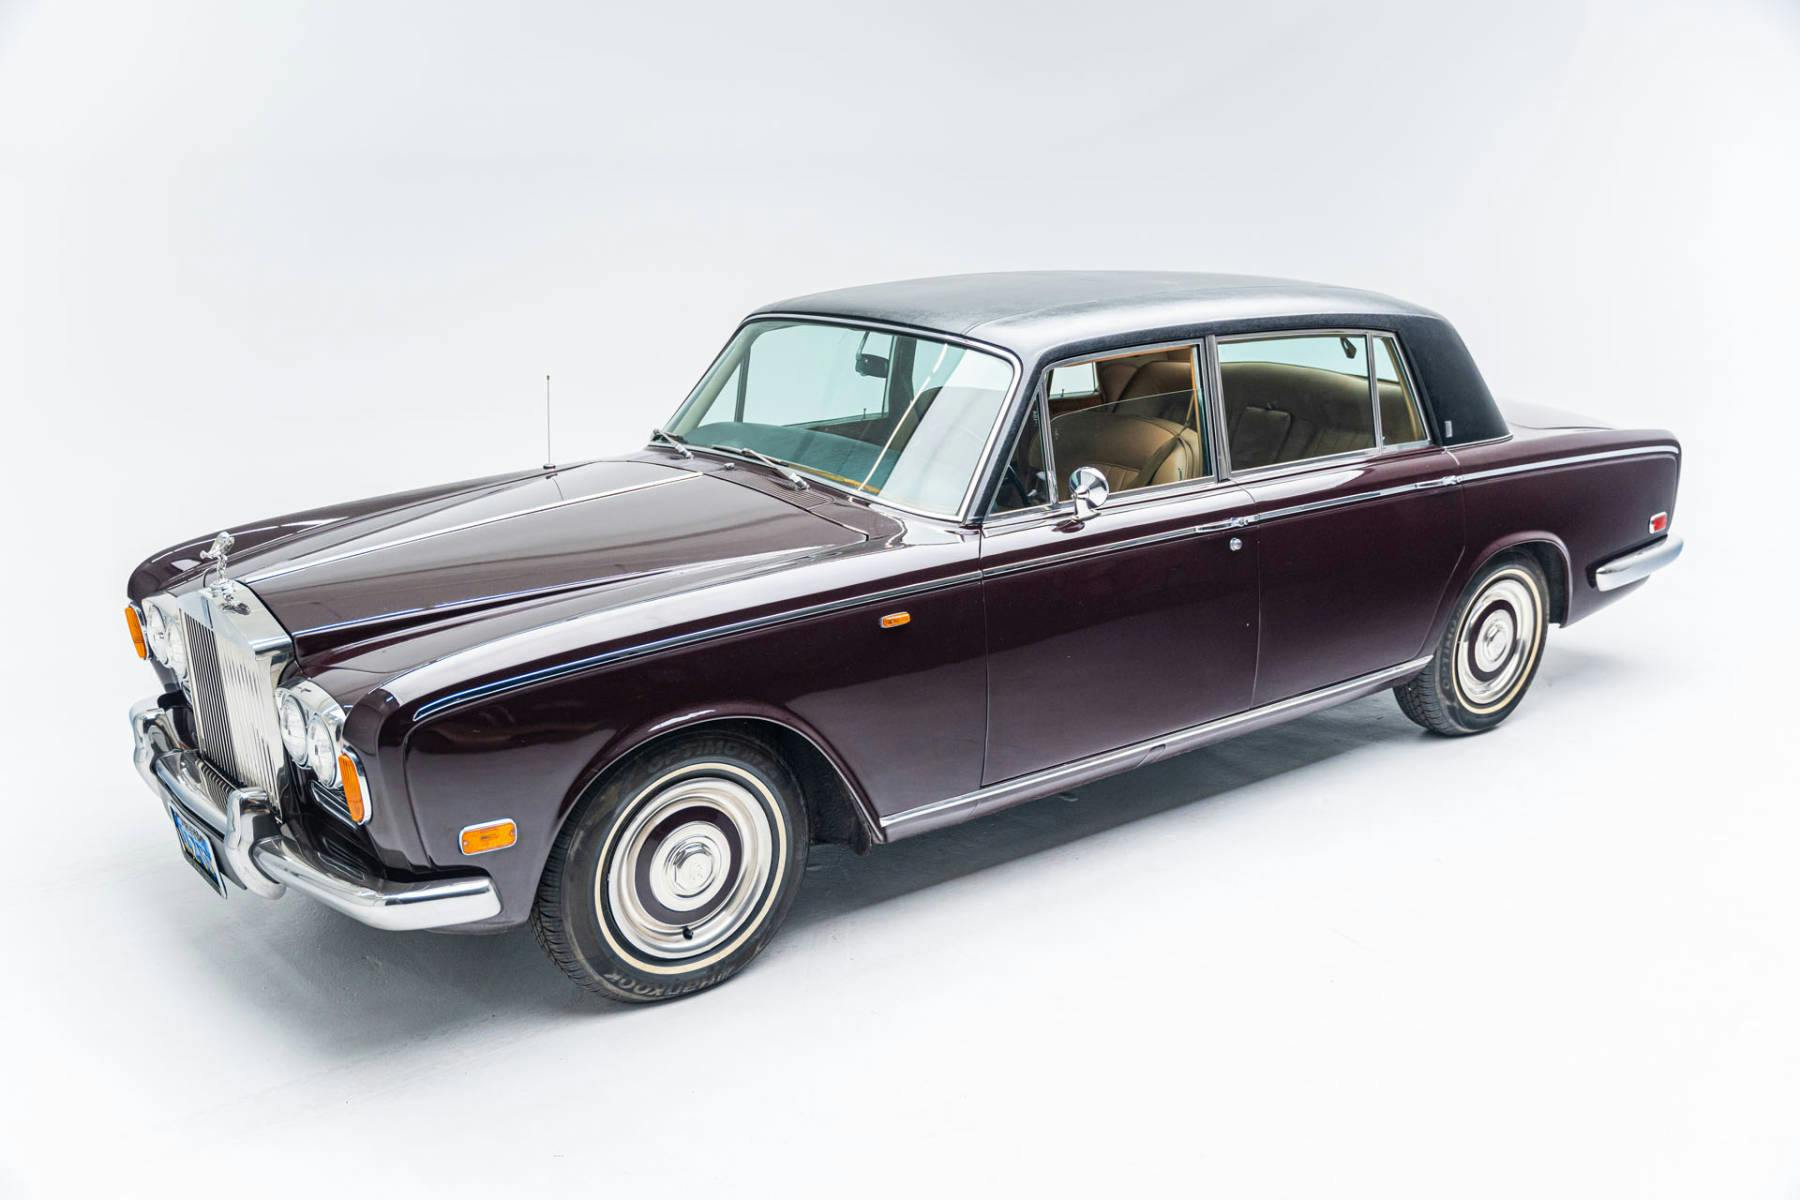 Auction Pick of the Week: 1970 Rolls-Royce Silver Shadow Long